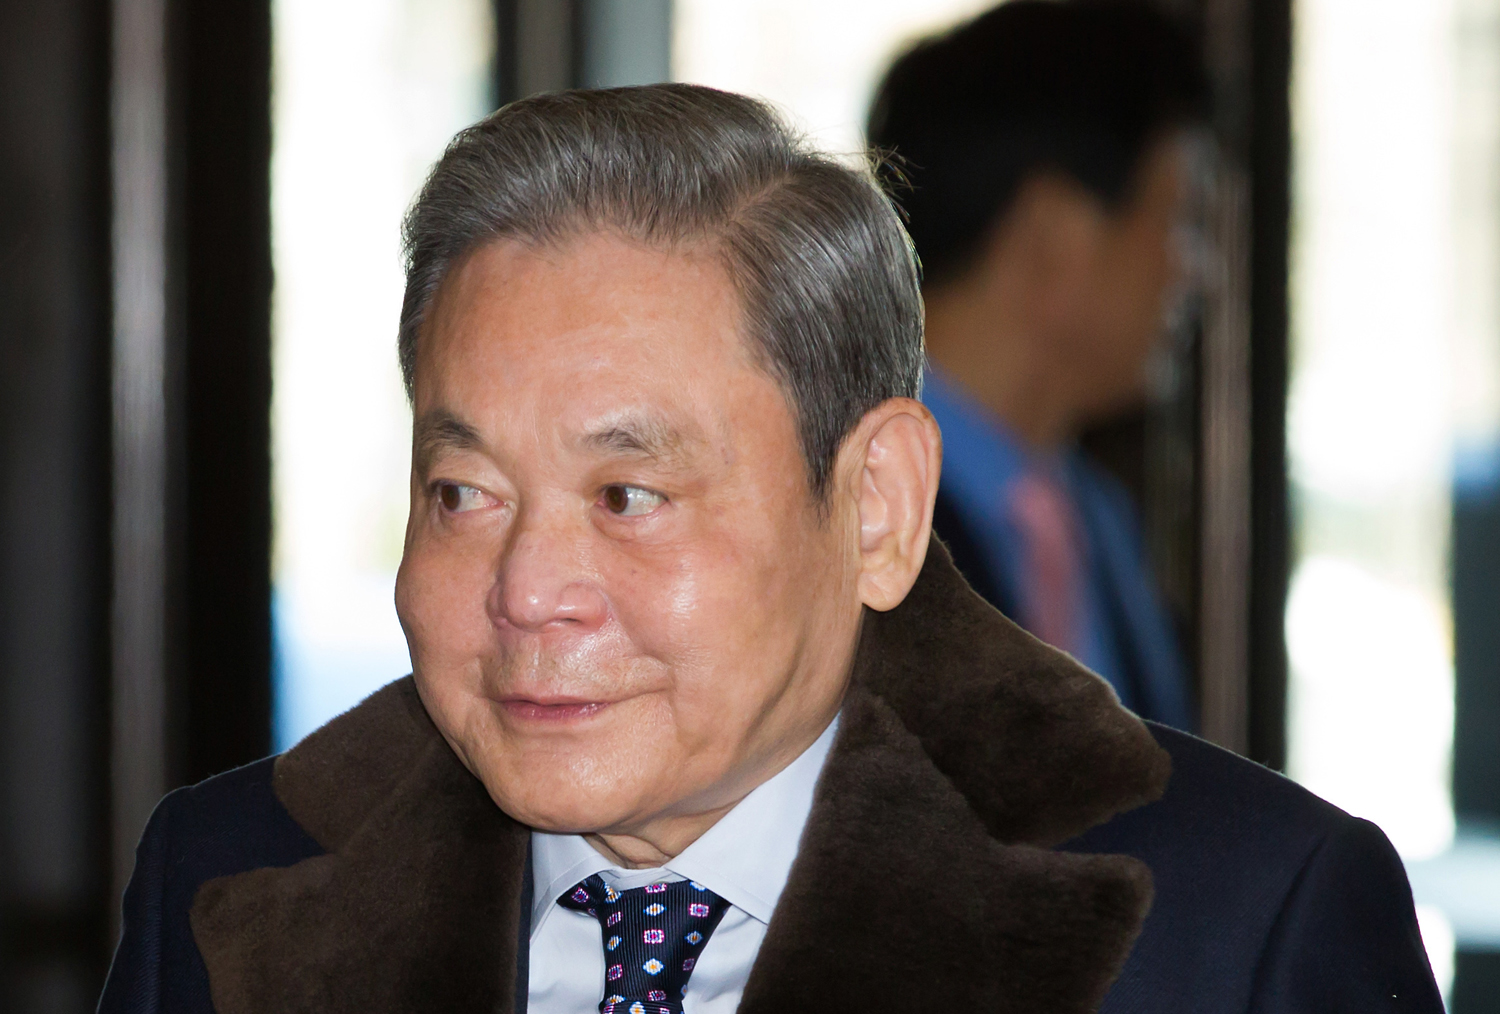 Lee Kun-hee, chairman of Samsung Electronics Co., arrives for a company meeting at the Shilla hotel in Seoul on Wednesday, Jan. 2, 2013 (Bloomberg—Getty Images)